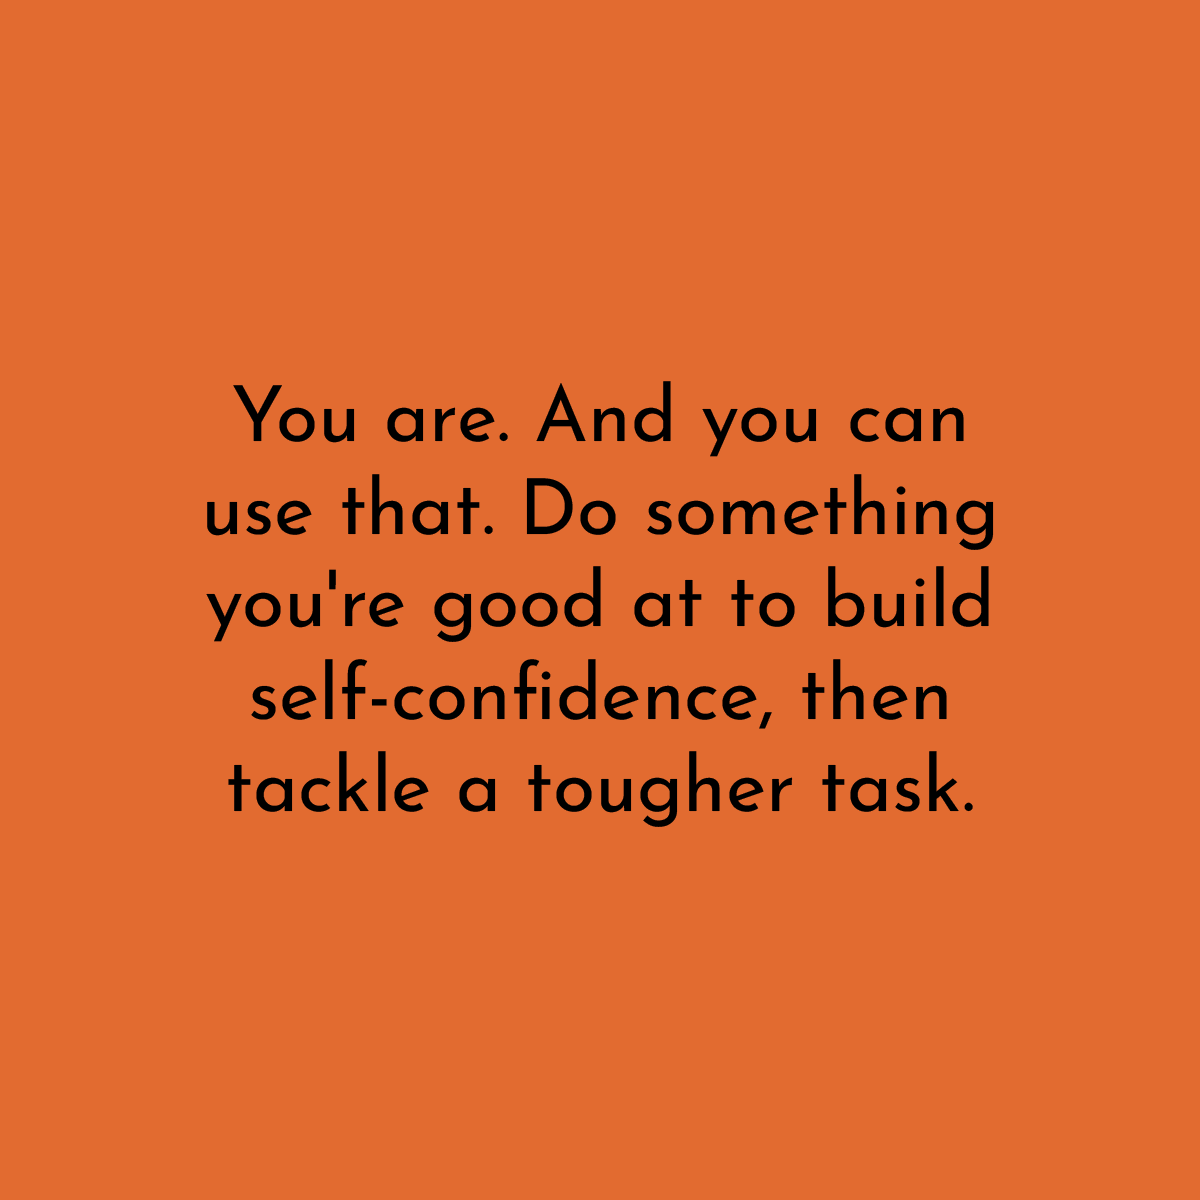 You are. And you can use that. Do something you're good at to build self-confidence, then tackle a tougher task.